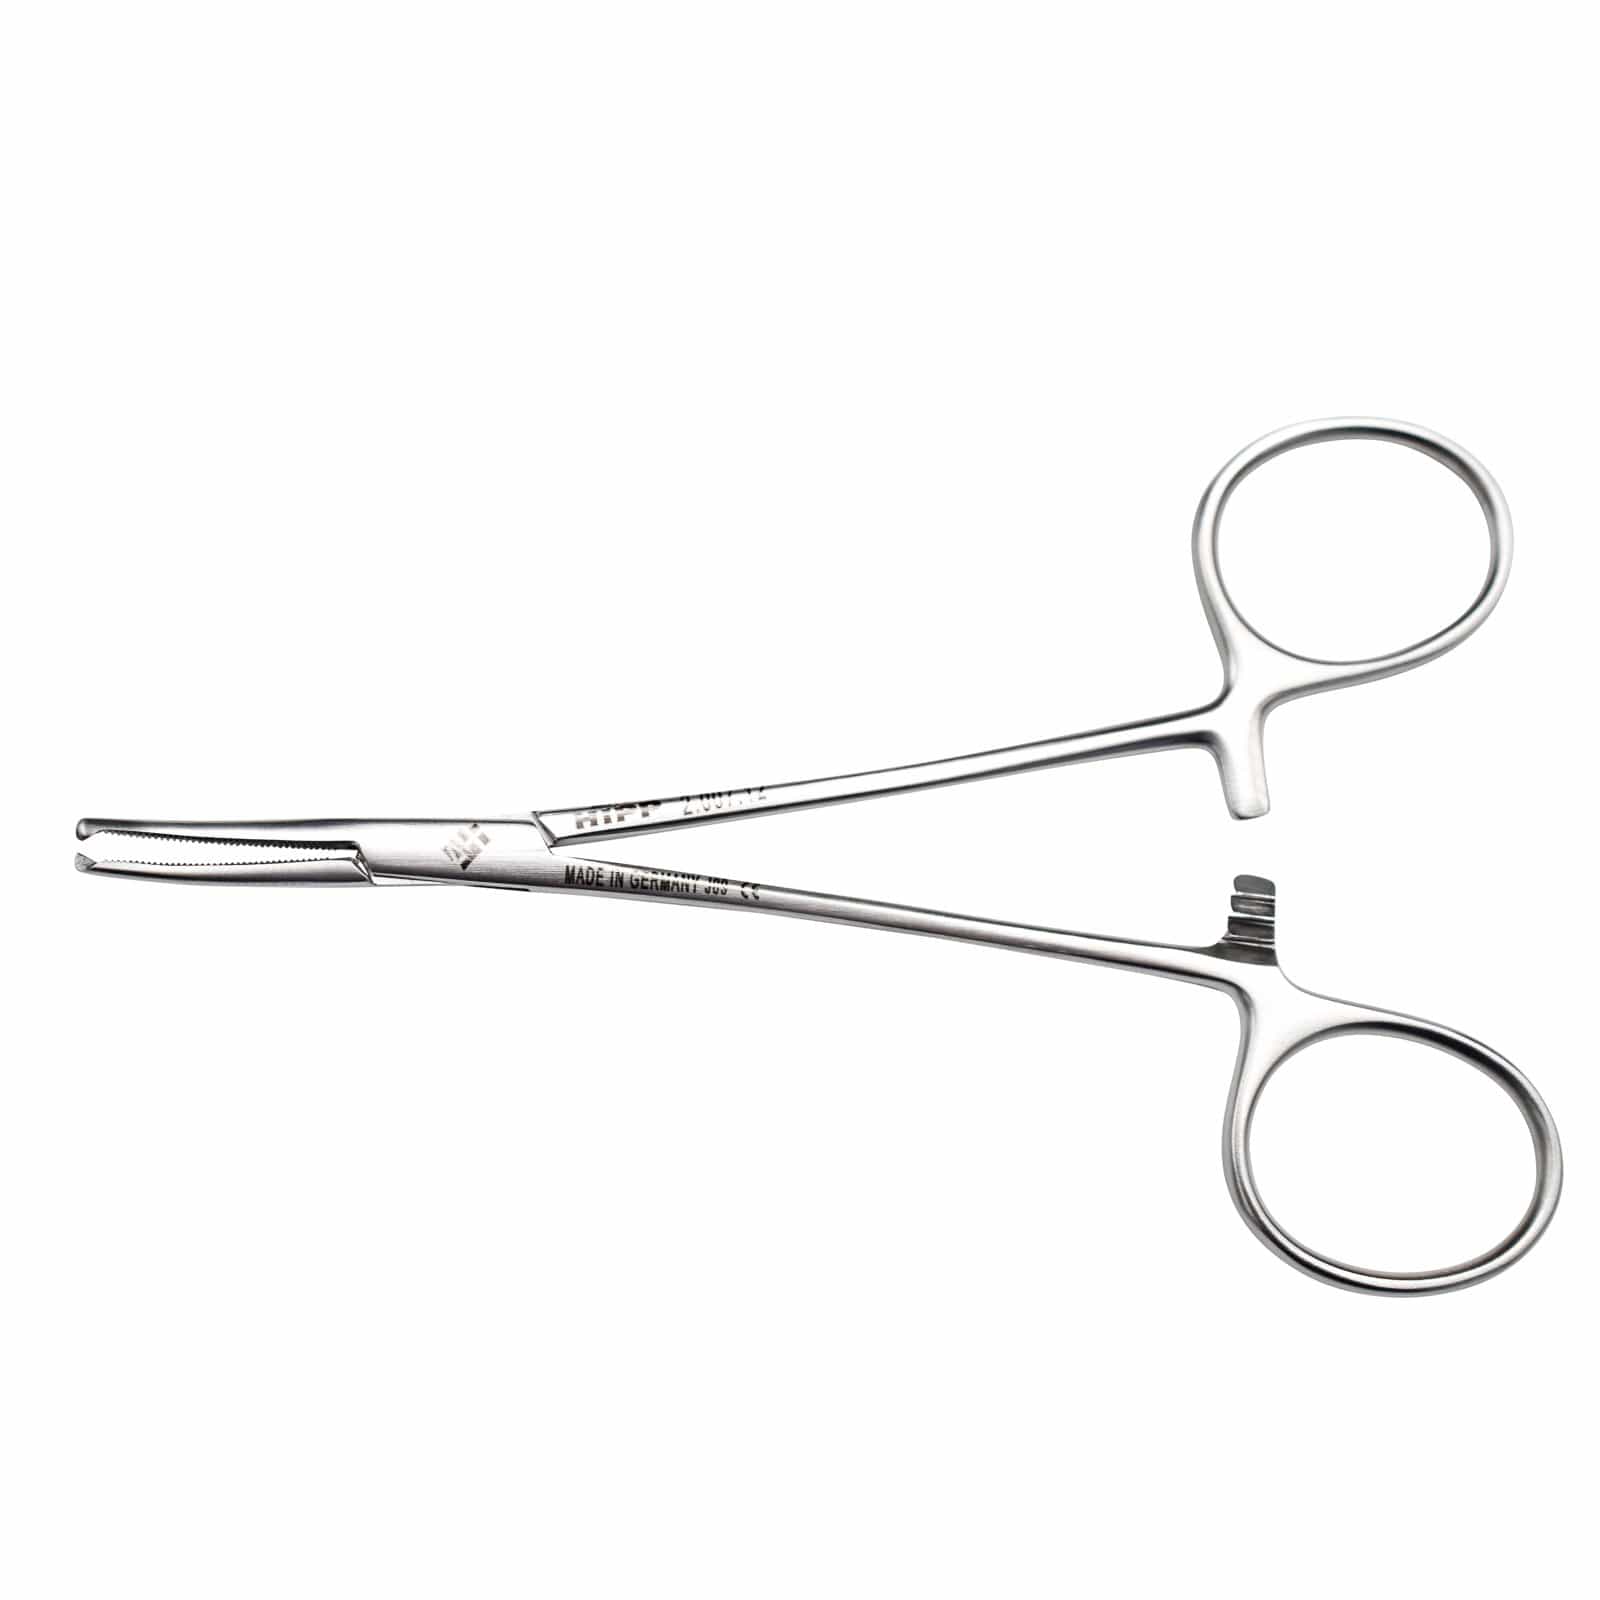 Hipp Surgical Instruments Hipp Halsted Mosquito Forceps